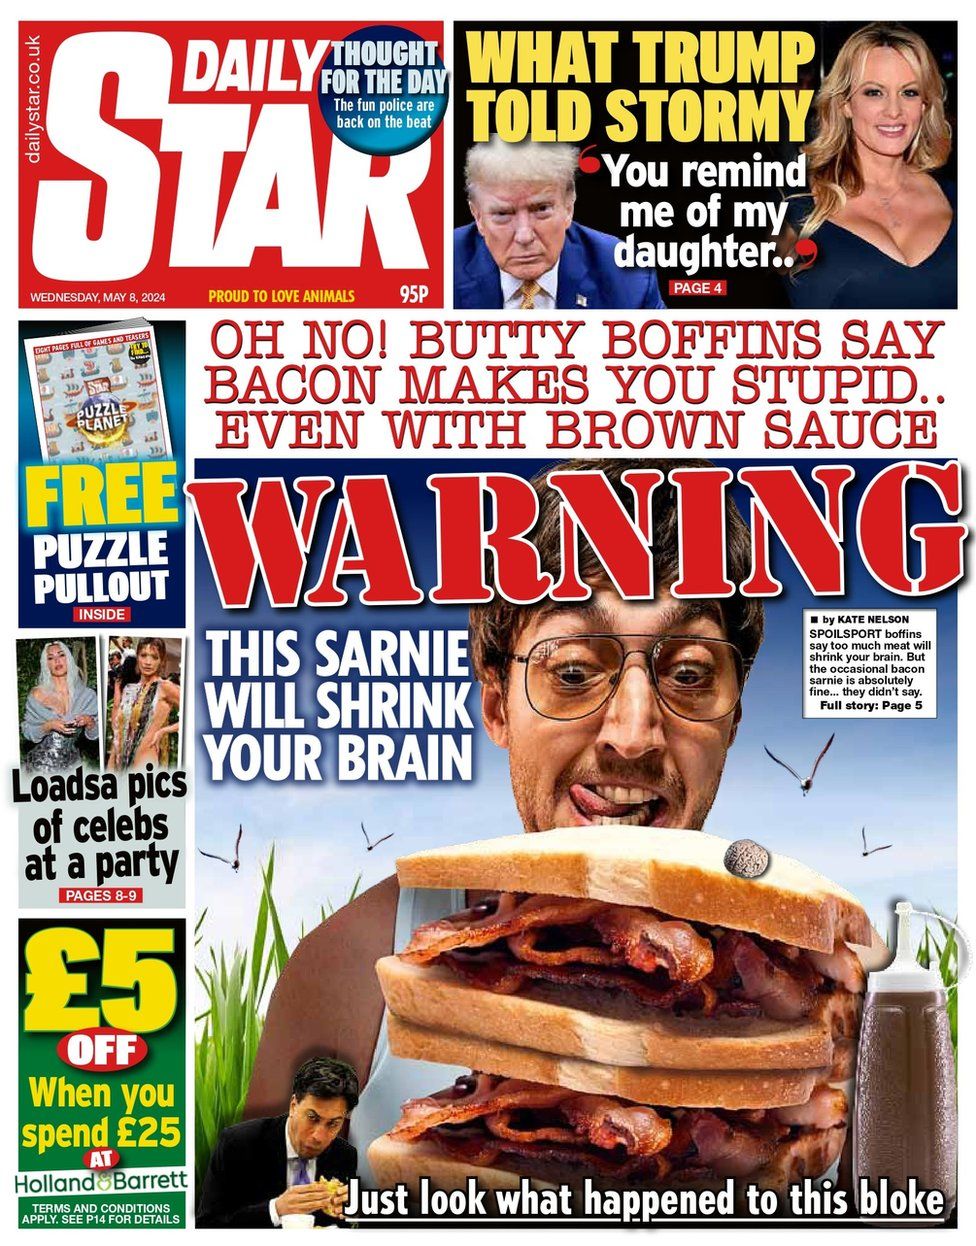 The Daily Star front page